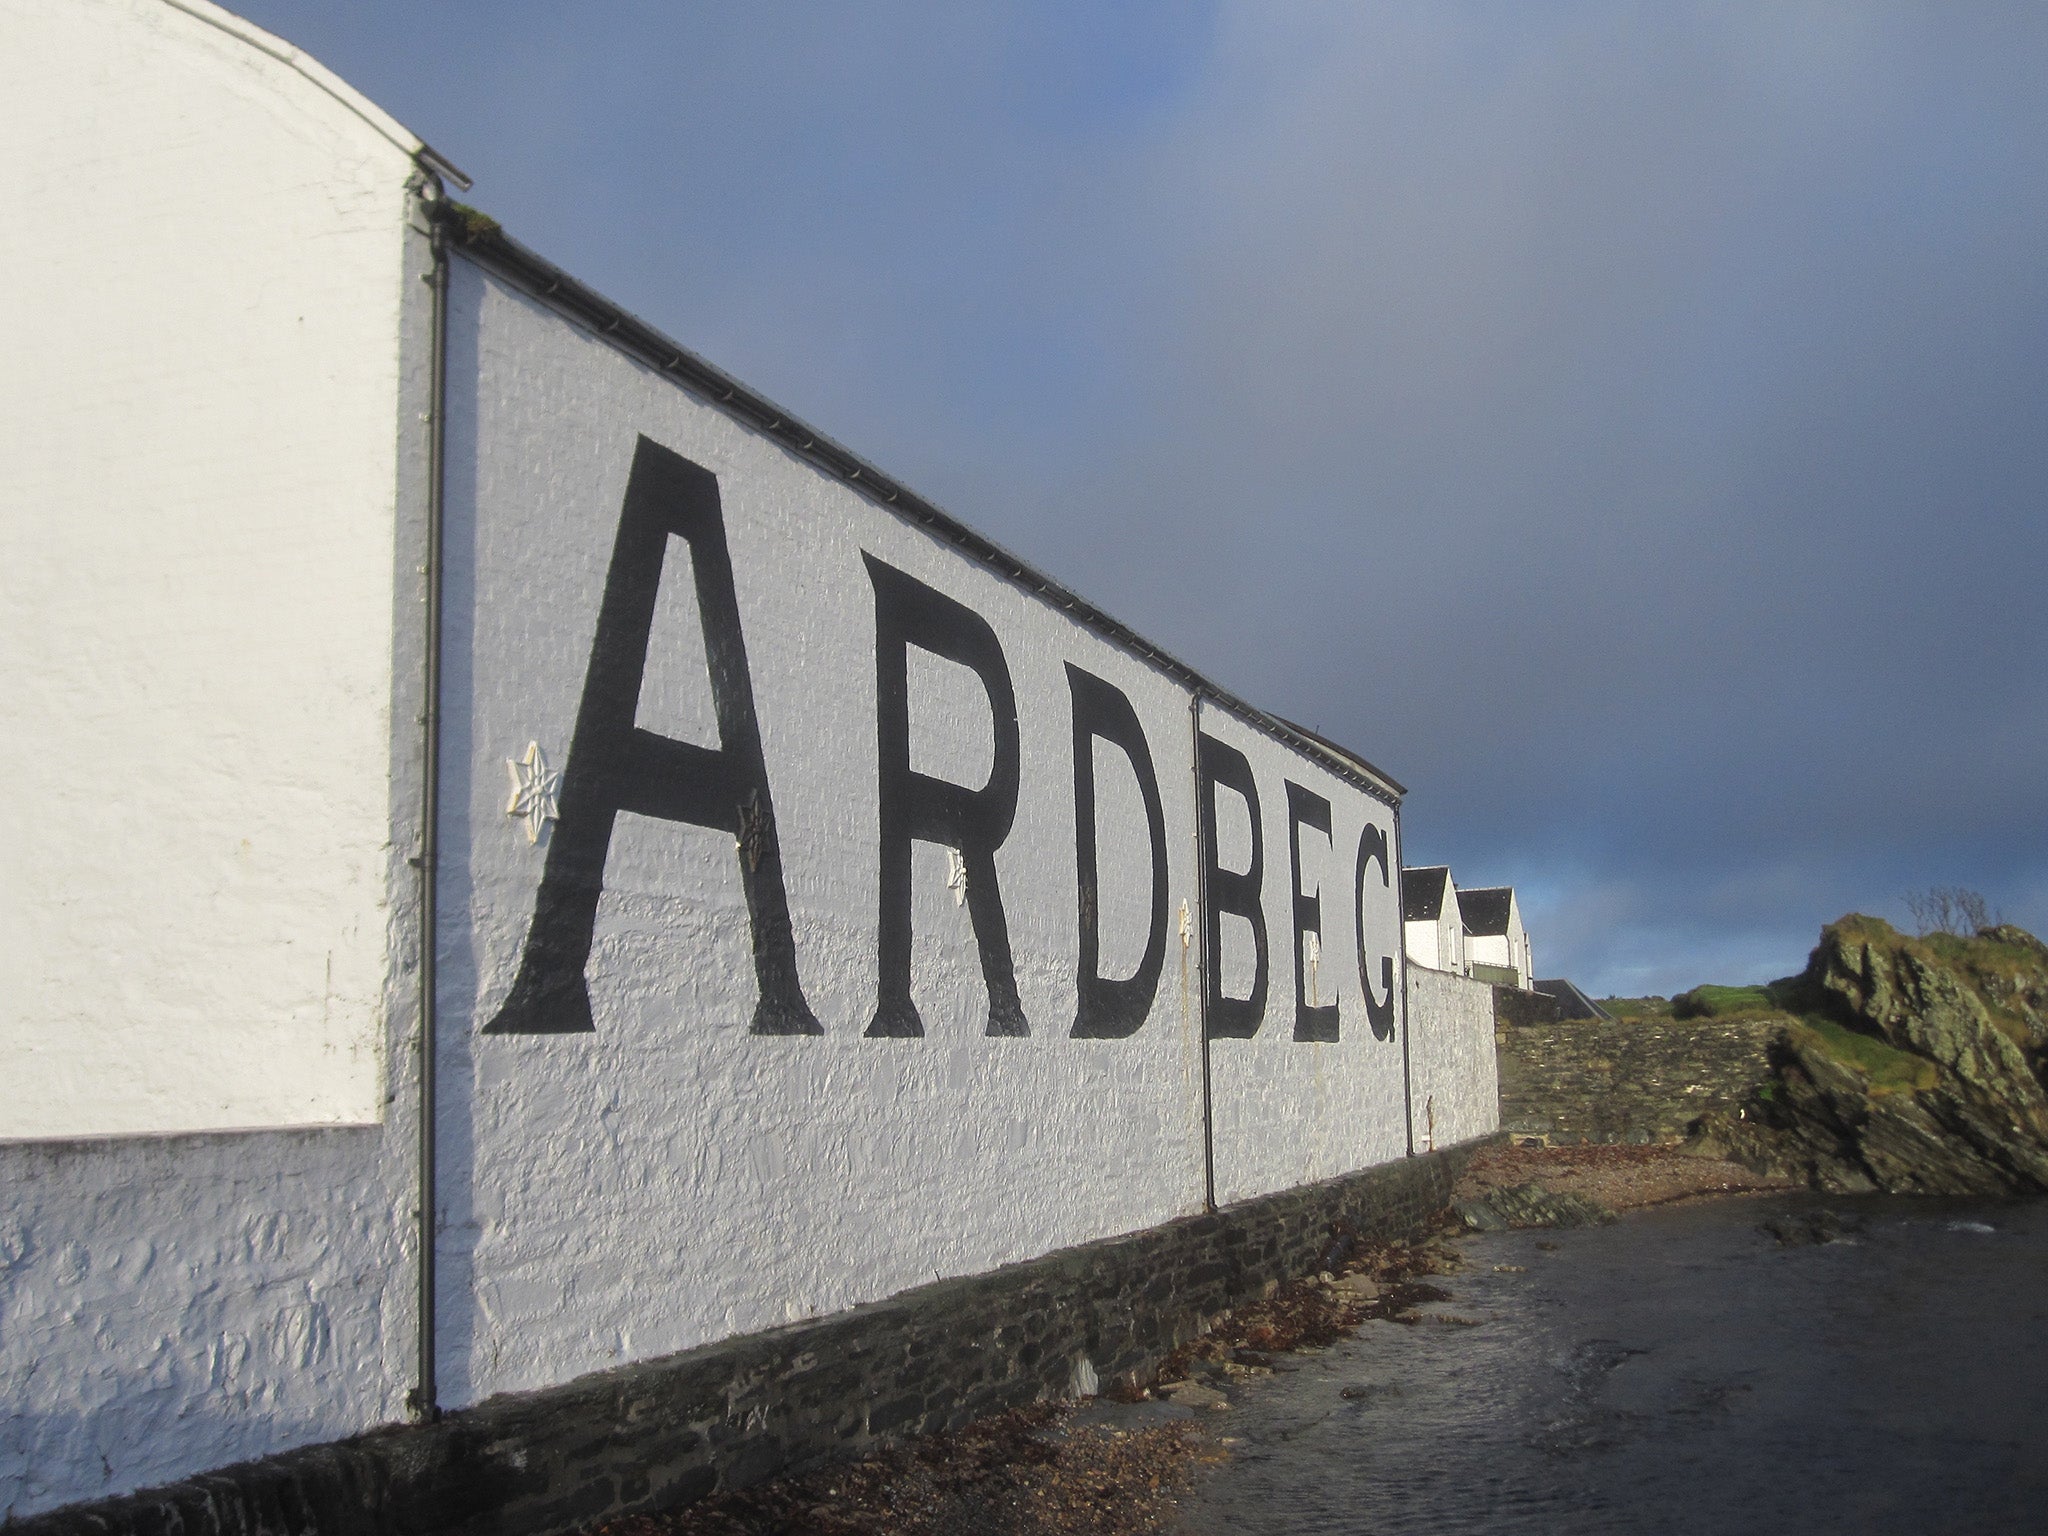 Ardbeg Distillery has been closed twice in its 200-year-history. It is now owned by Glenmorangie and produces its distinctive heavily-peated single malt (Photographs by Harry Cockburn)